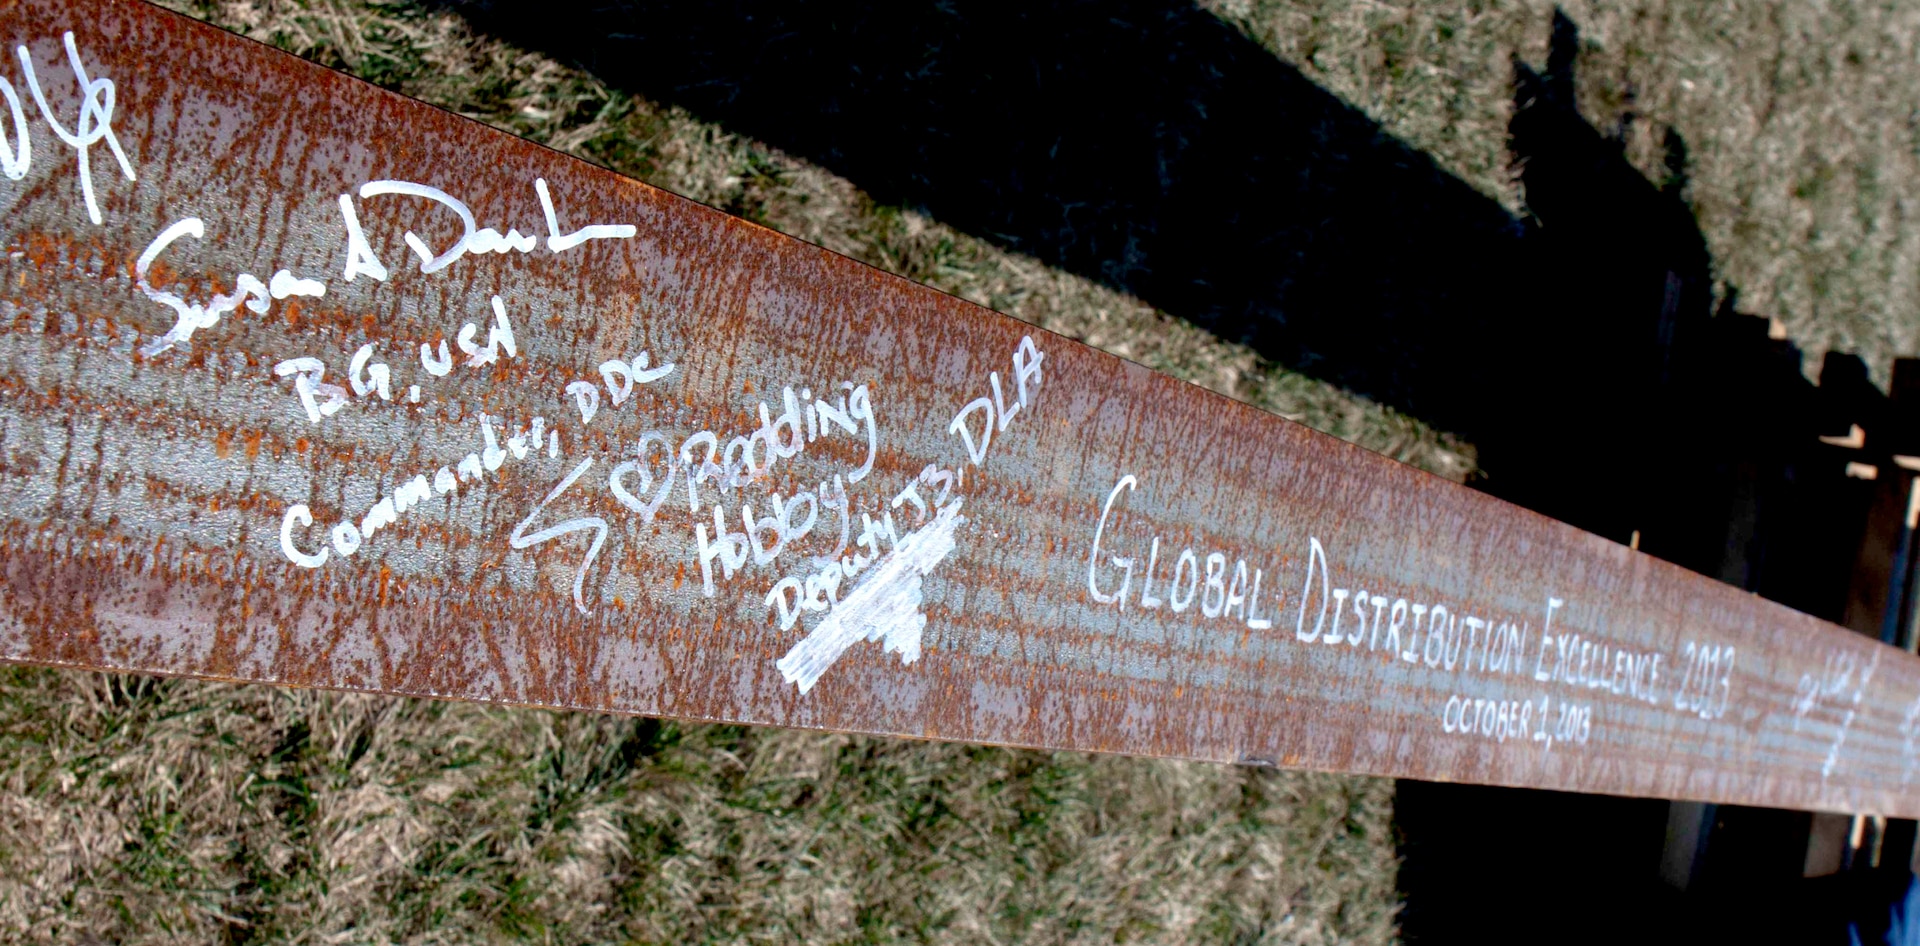 Commemorating DLA Distribution’s 16th anniversary and celebrating the construction of the organization’s new headquarters building, employees signed a beam destined for the construction site, leaving an indelible mark and becoming a part of DLA Distribution history.